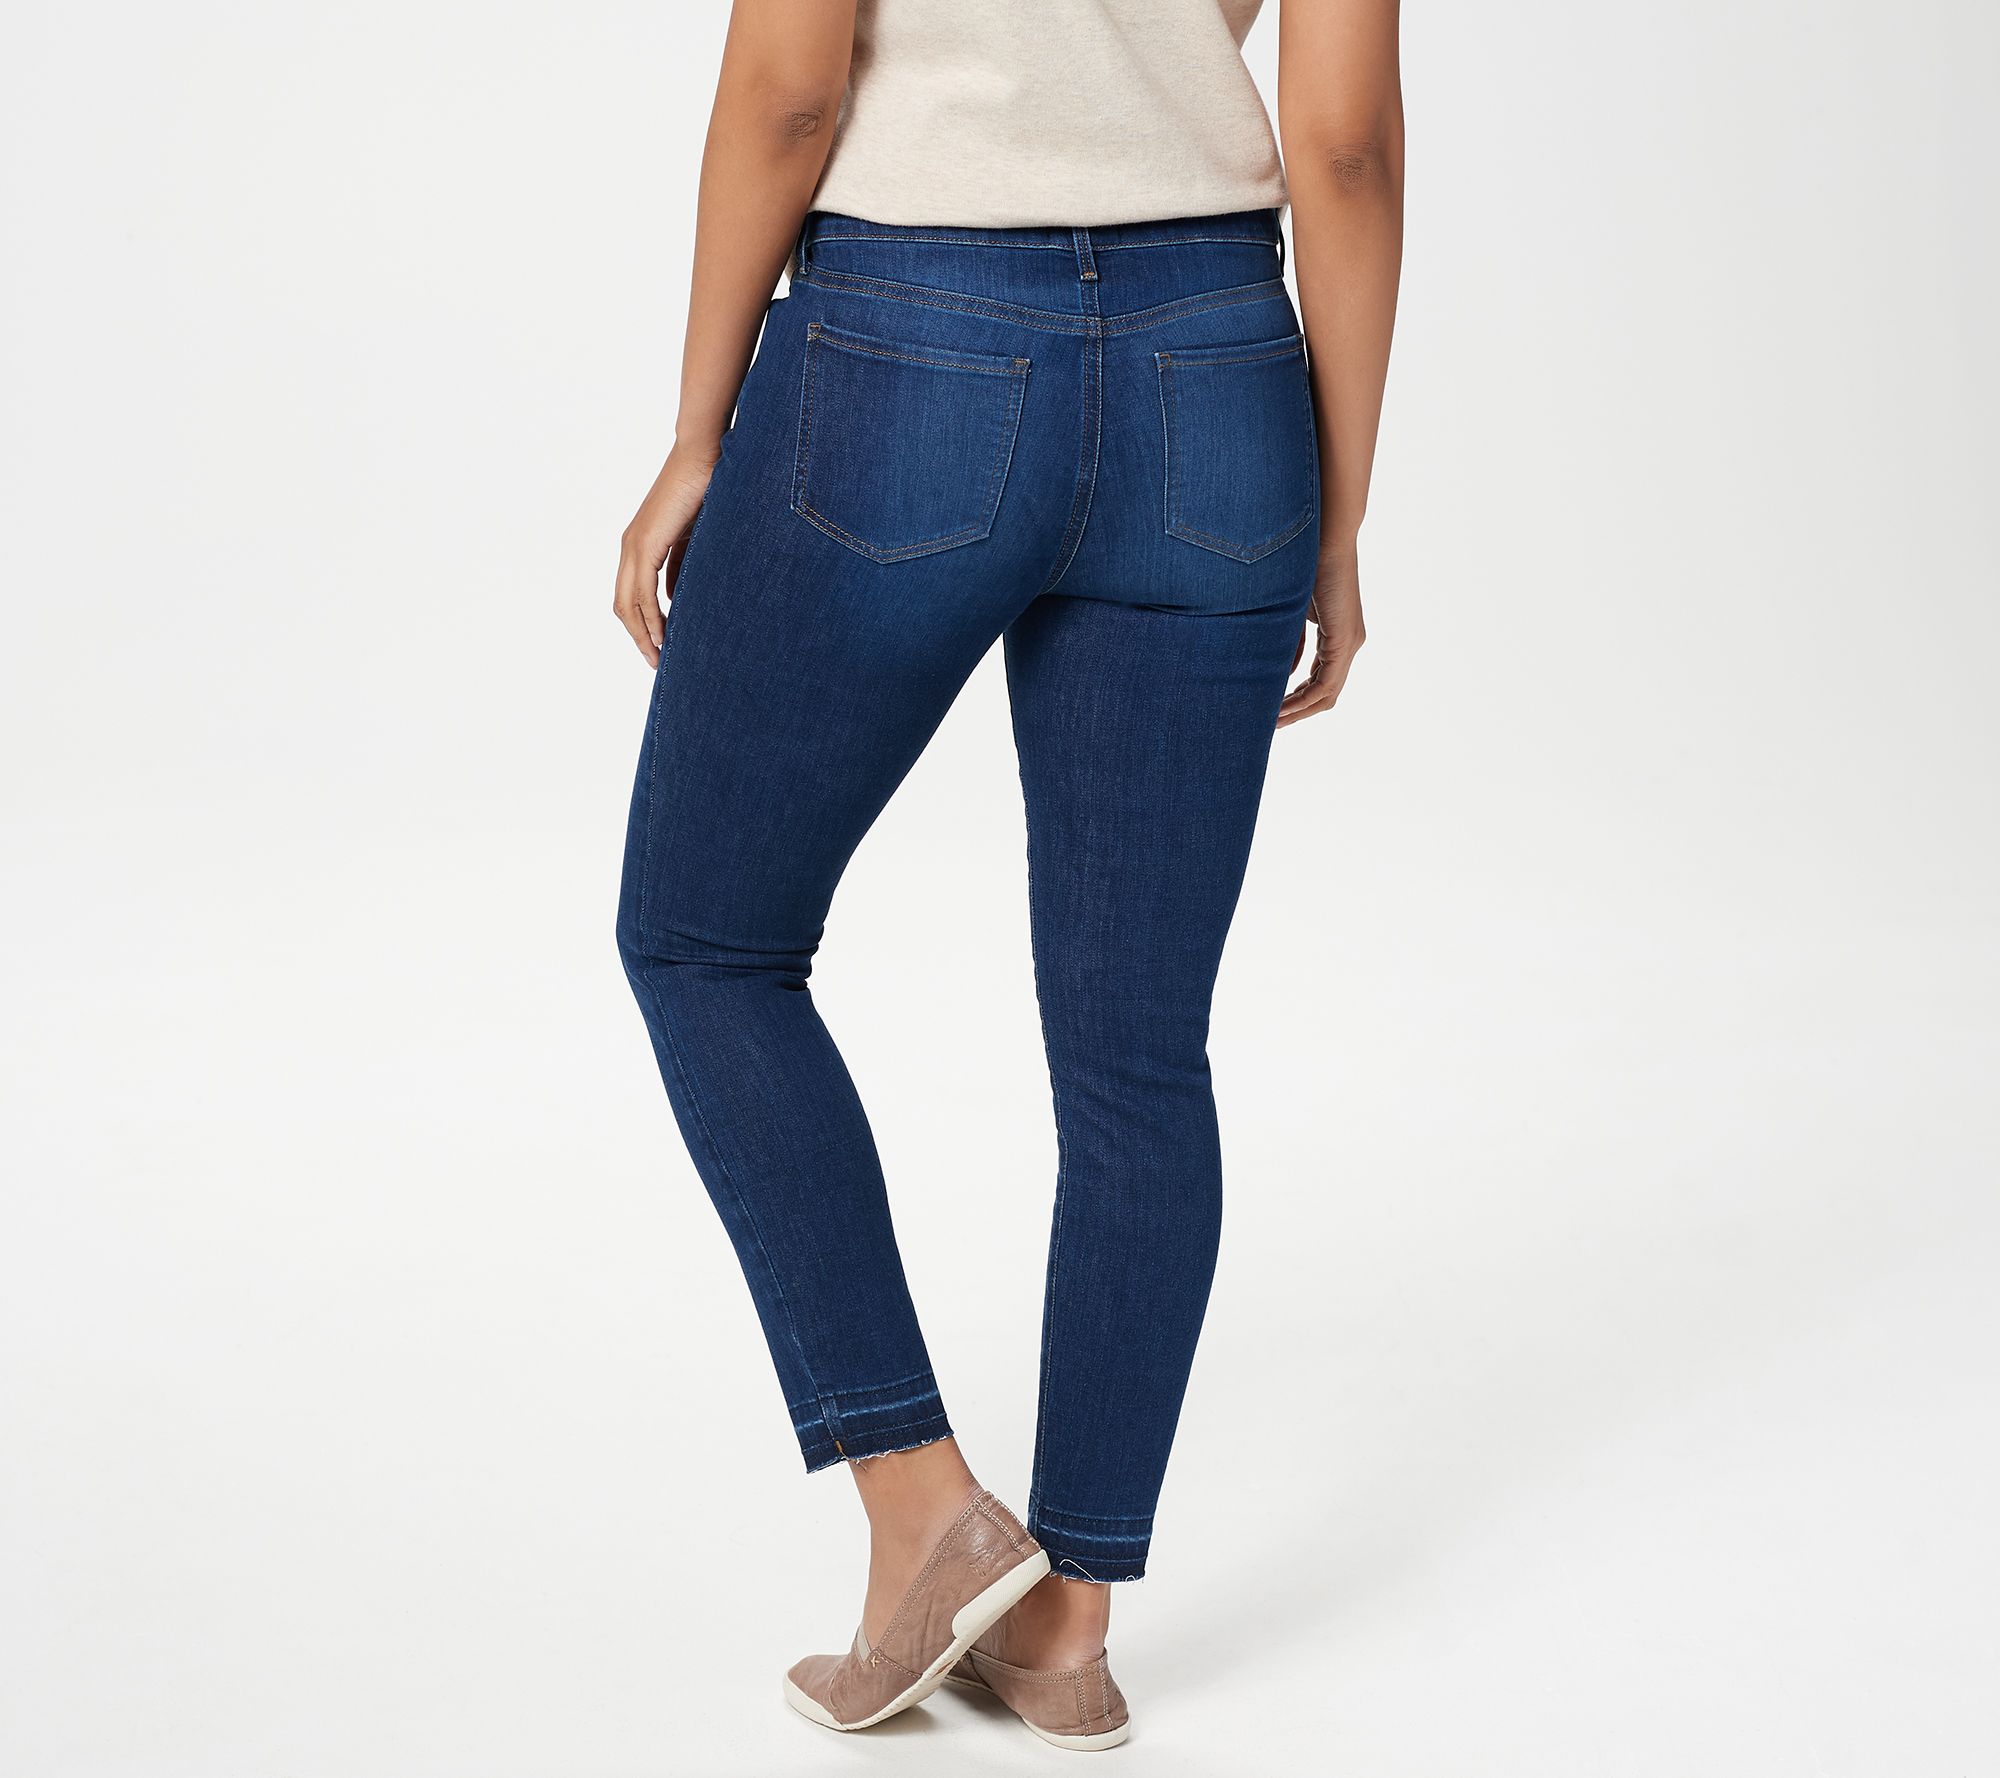 NYDJ Ami Skinny Ankle Jeans with Released Hem -Cooper - QVC.com